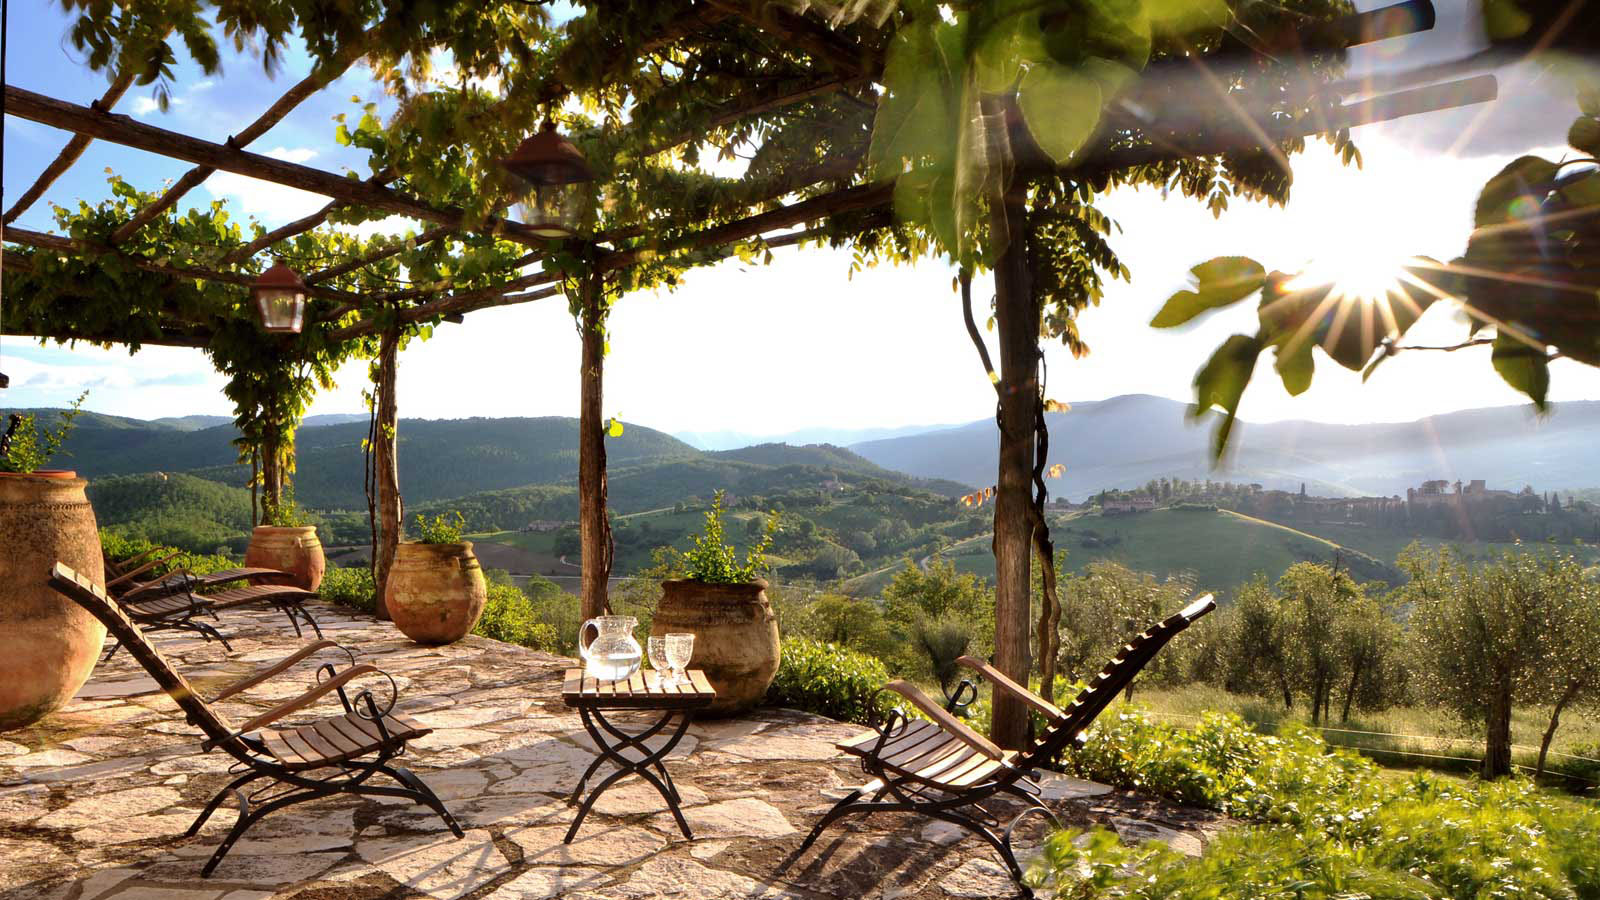 Terrace with Views of Umbrian Hills